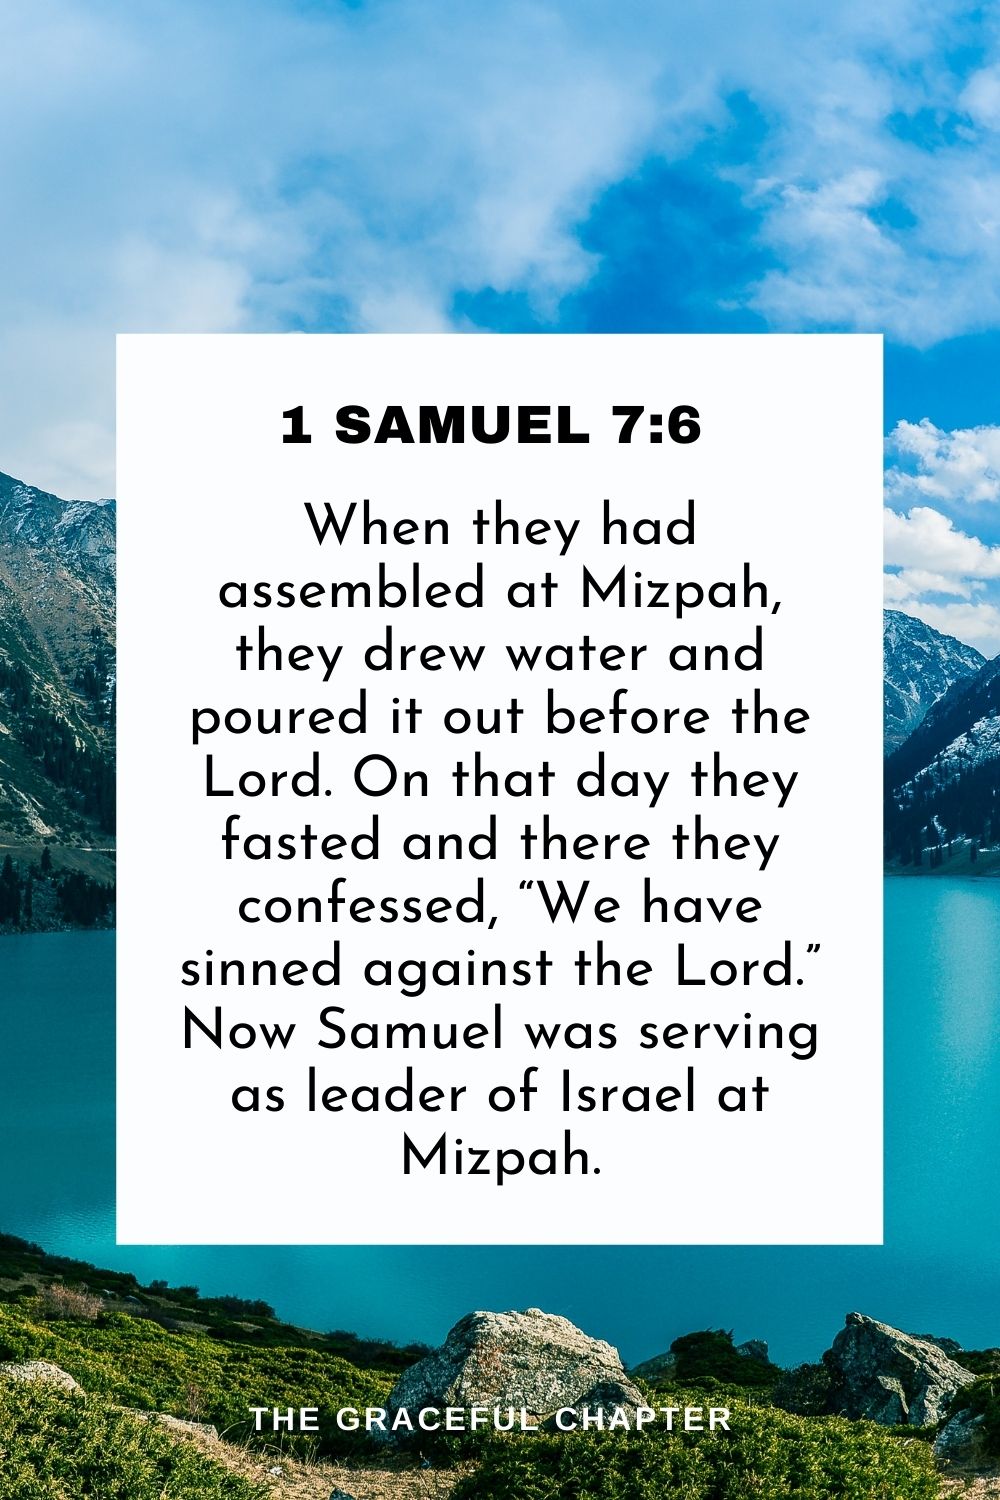 When they had assembled at Mizpah, they drew water and poured it out before the Lord. On that day they fasted and there they confessed, “We have sinned against the Lord.” Now Samuel was serving as leader of Israel at Mizpah. 1 Samuel 7:6